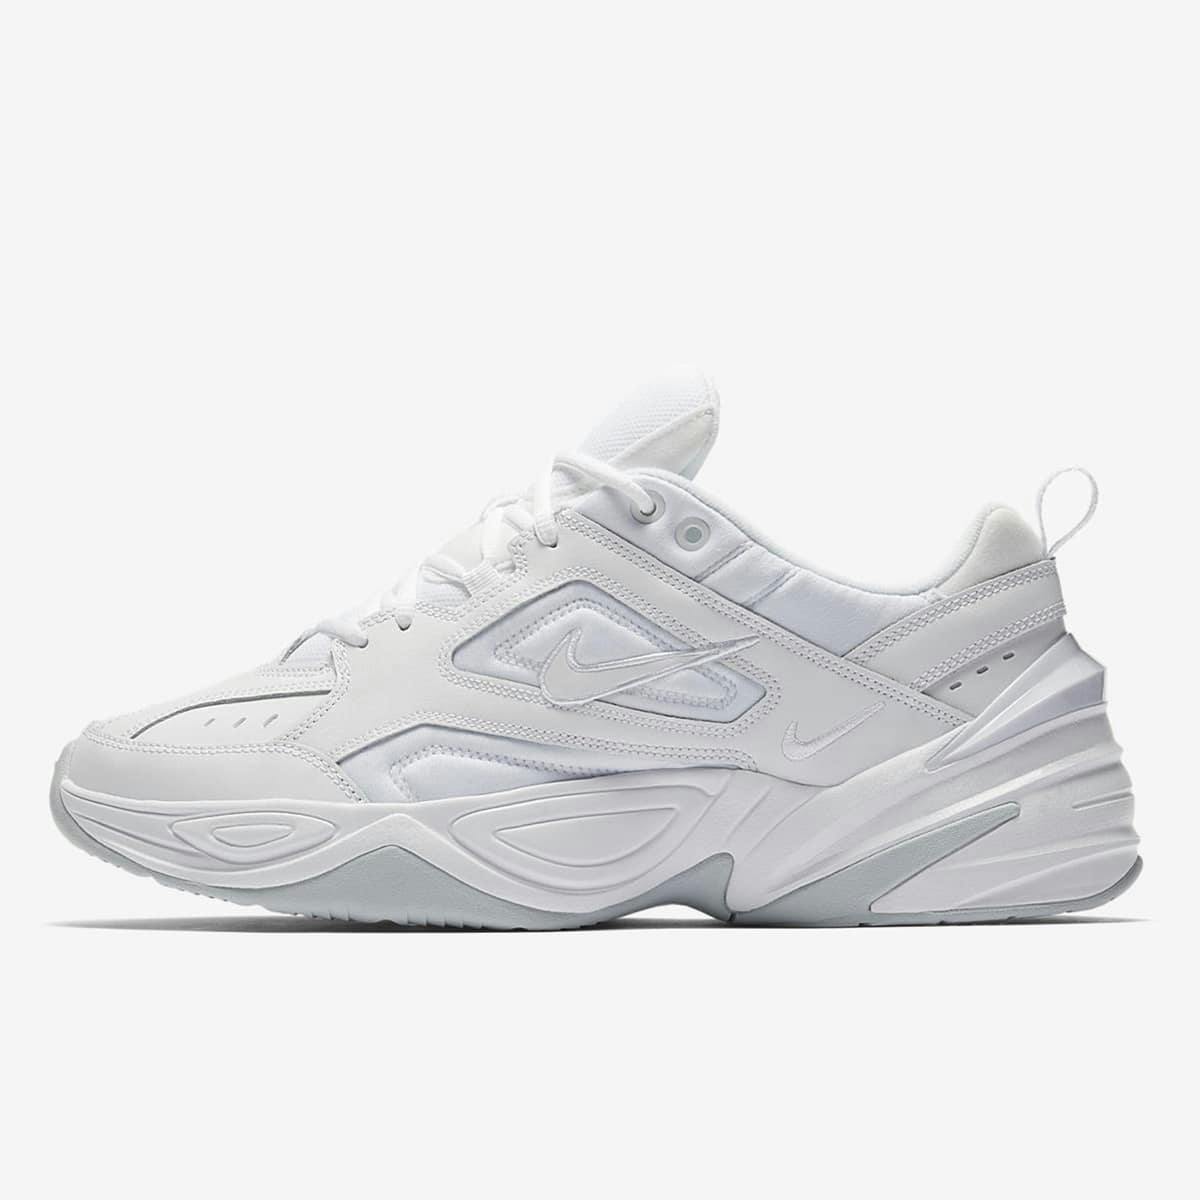 Nike M2K Tekno - Register Now on END. Launches | END.